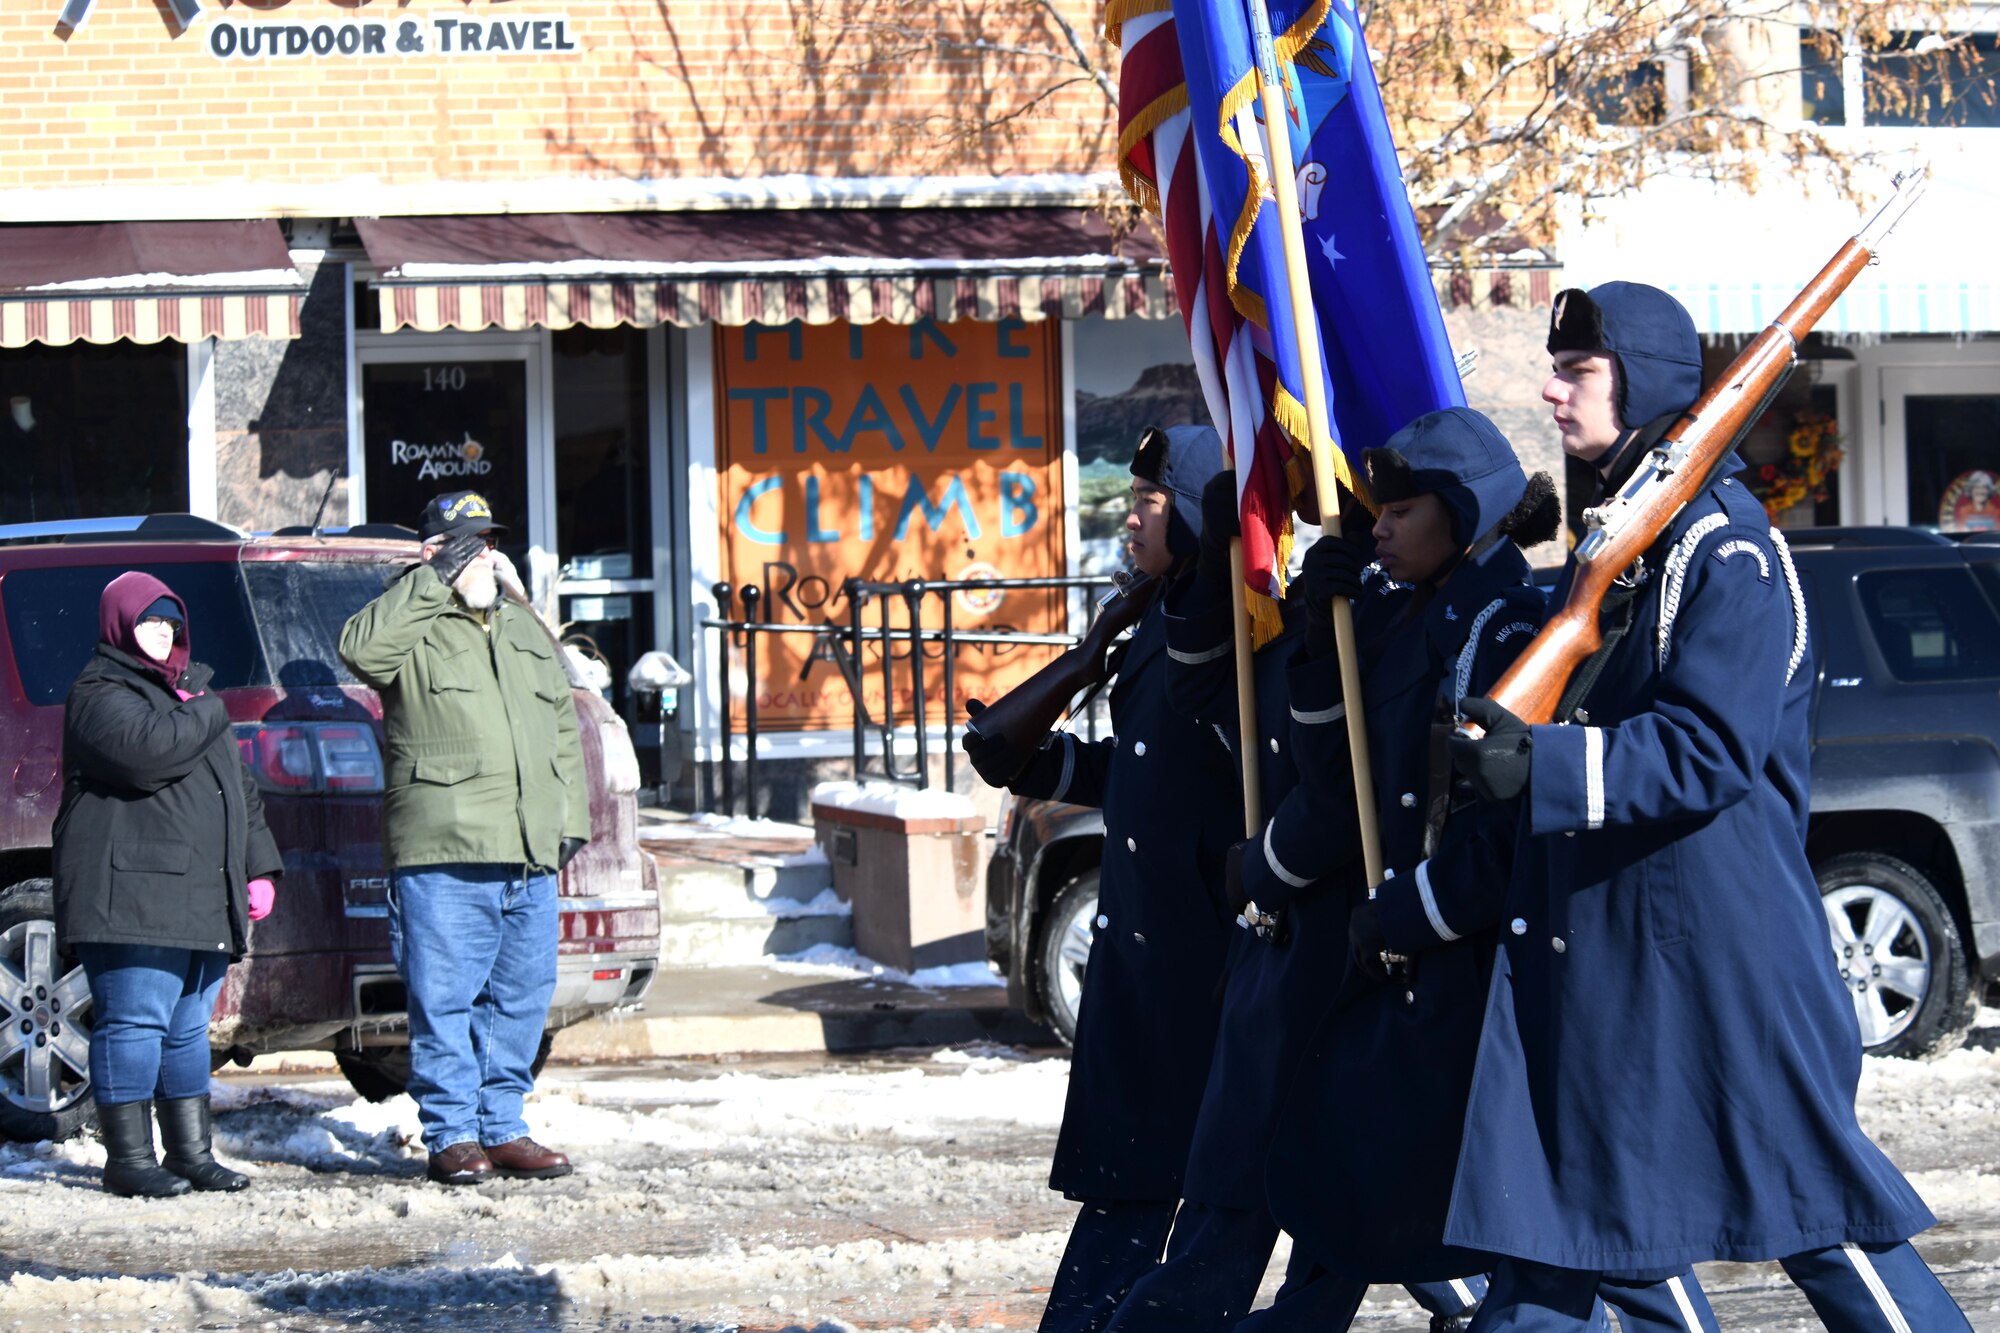 A veteran salutes the flag as the Ellsworth Air Force Base, S.D., Honor Guard walks in the 2019 Veteran’s Day Parade on Main Street in Rapid City, S.D., Nov. 11, 2019. The Veteran’s Day Ceremony and Parade celebrate and honor the nation’s veterans, and included a flag ceremony by the Honor Guard. (U.S. Air Force photo by Staff Sgt. Hailey Staker)